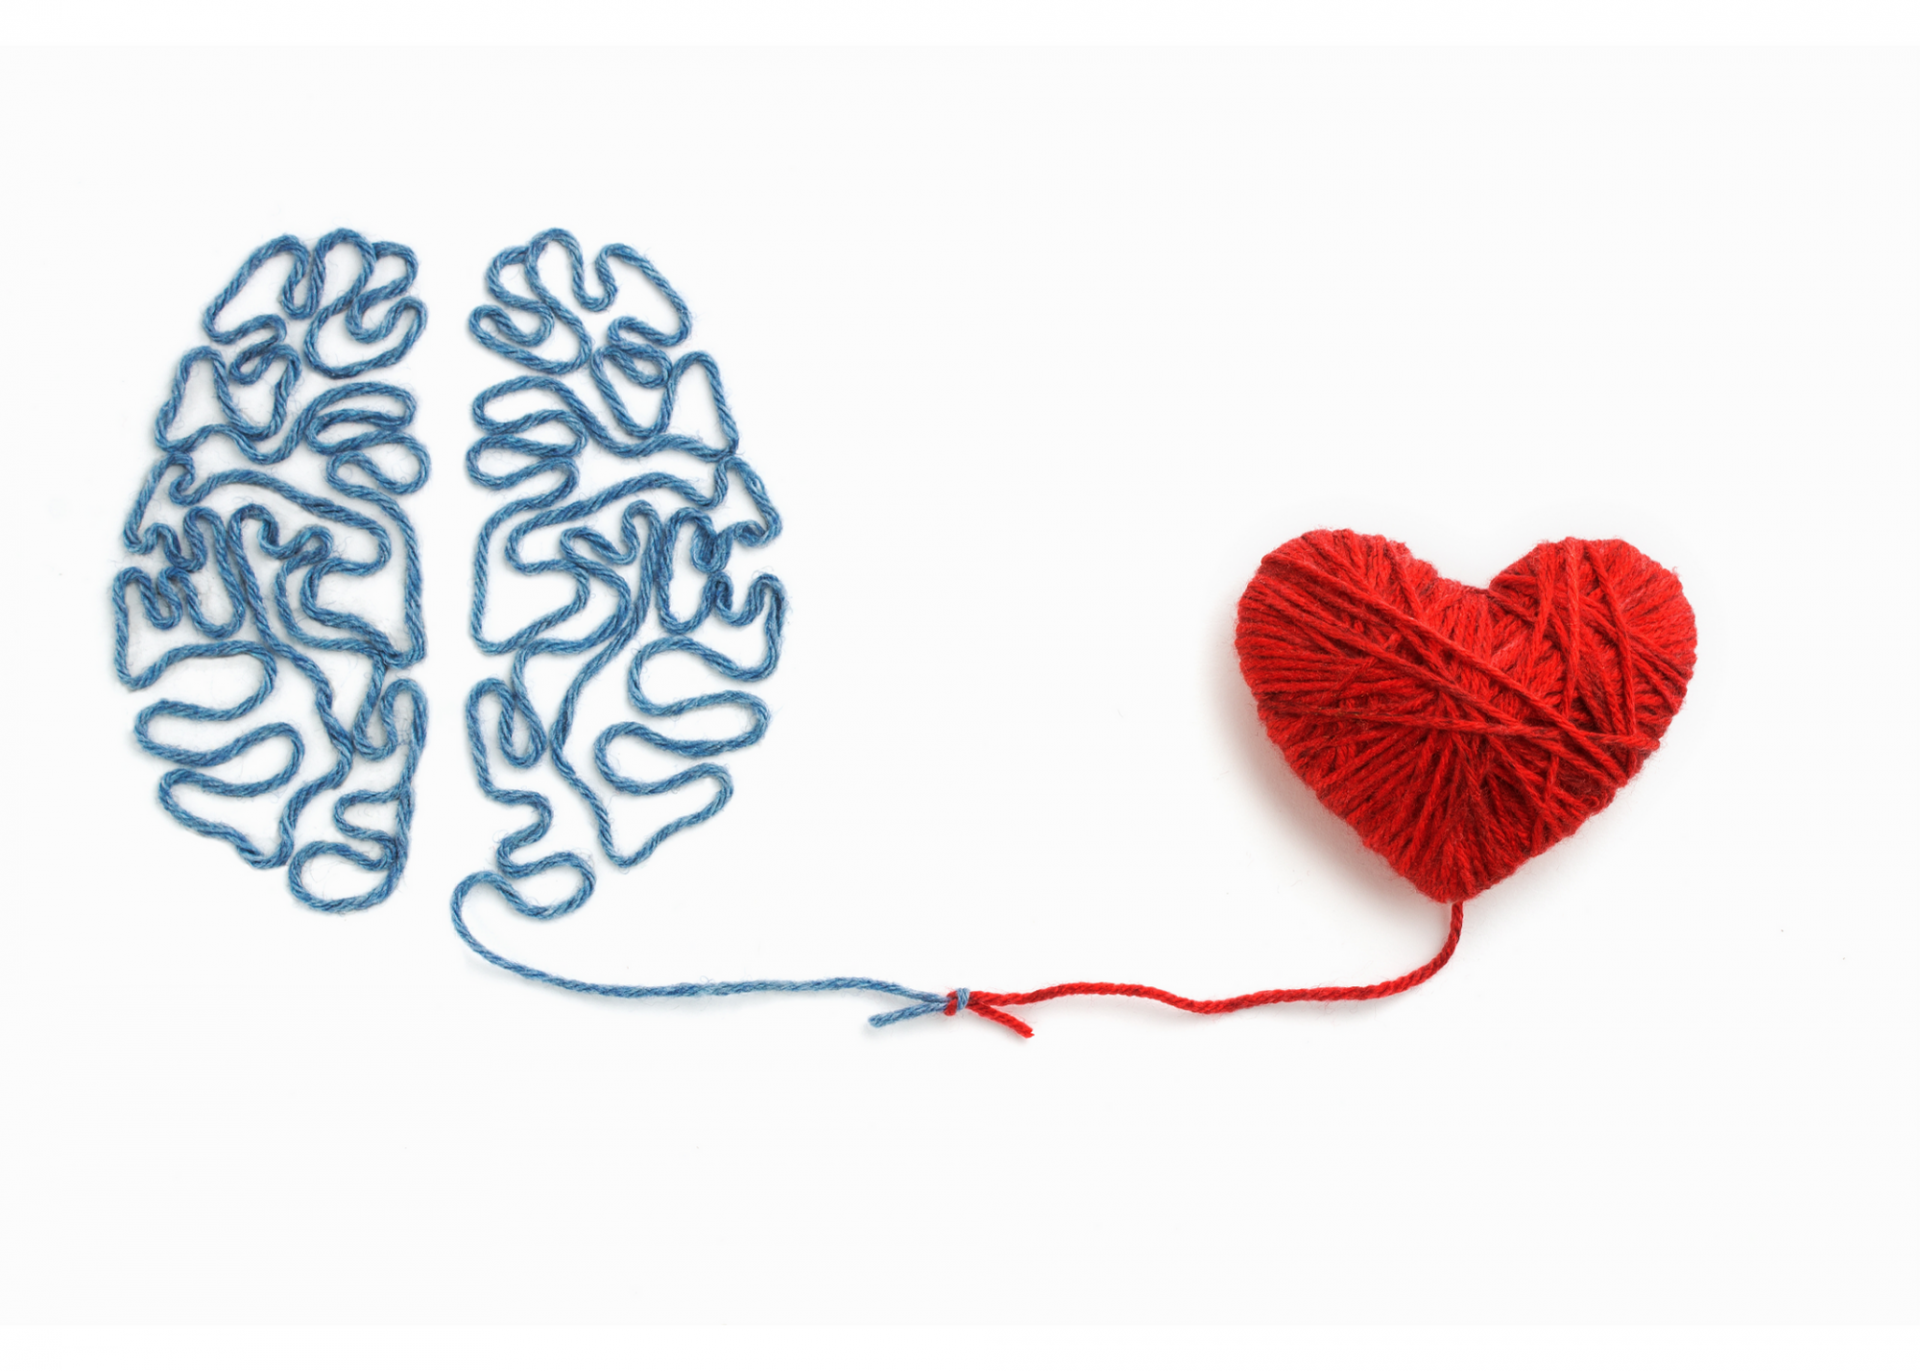 photot of a heart and a brain in yarn